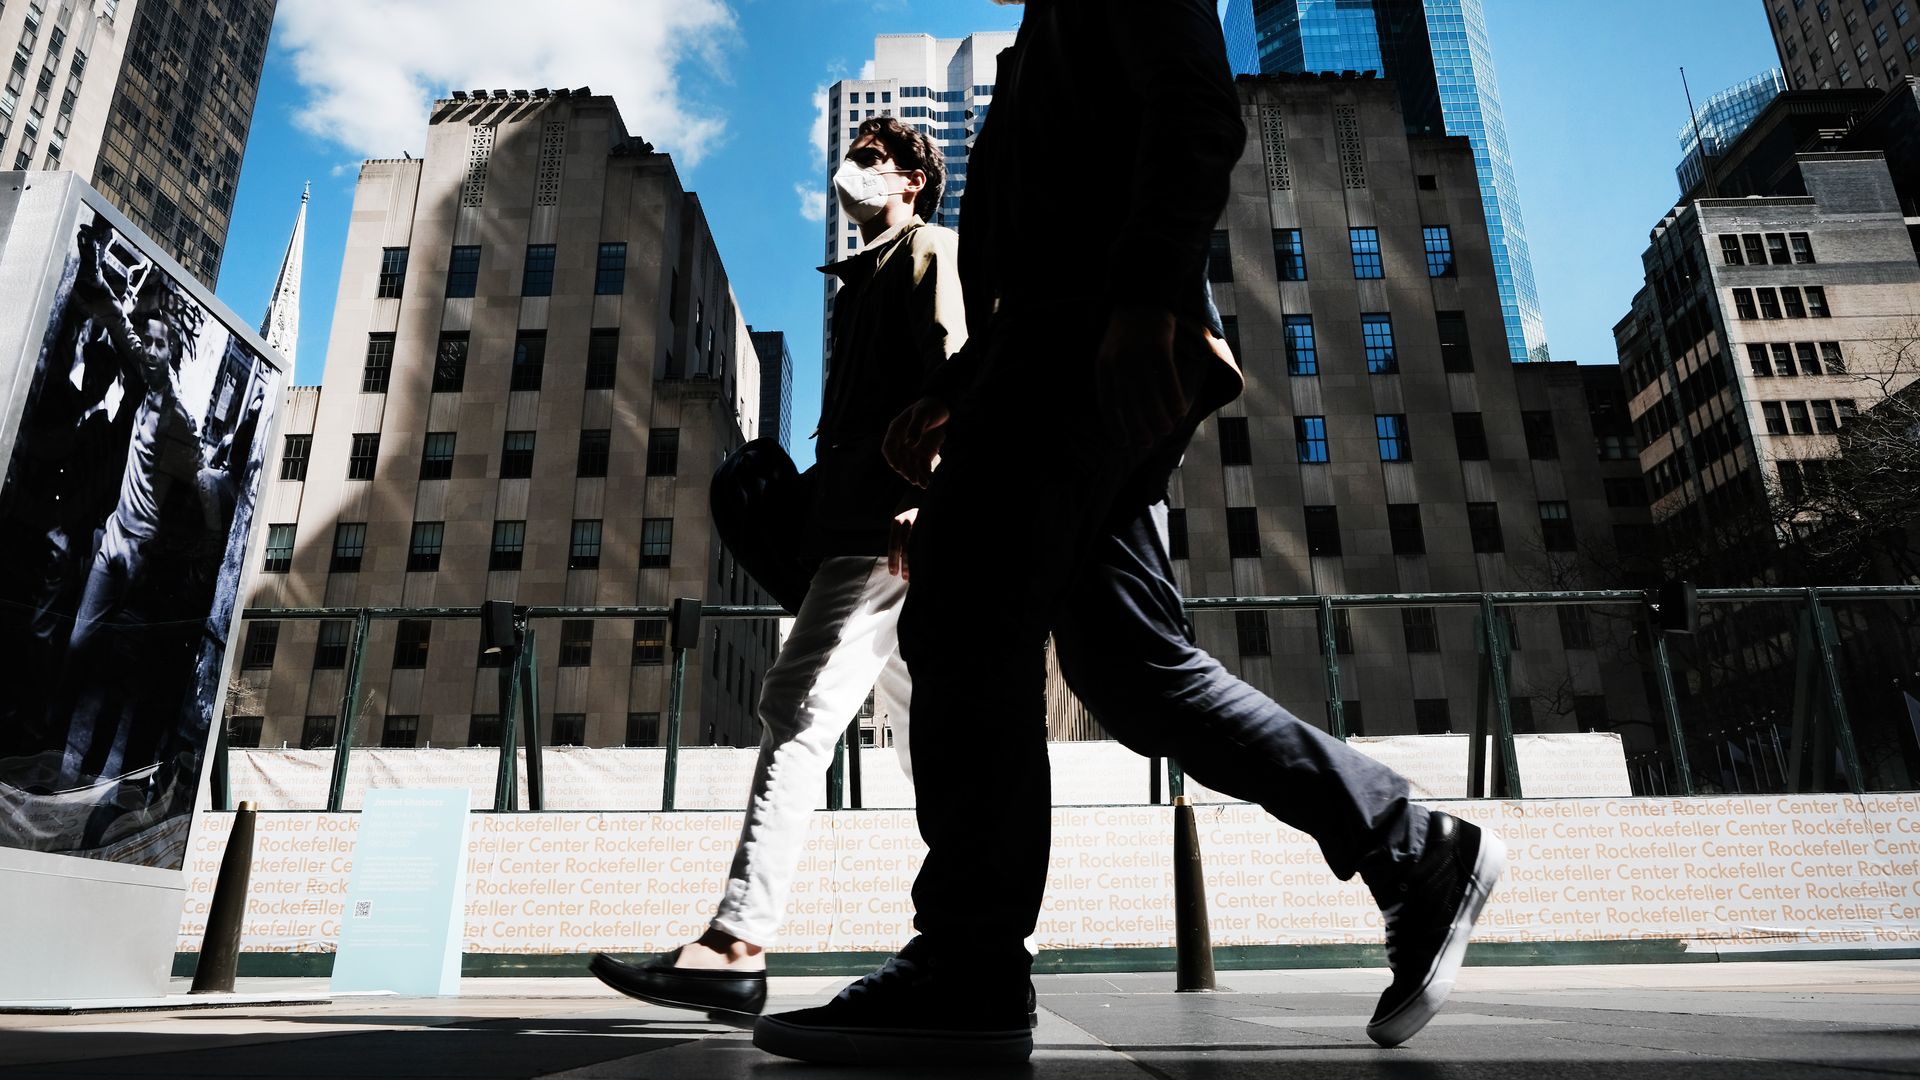 Two men walk on a sidewalk in front of tall buildings, shot from the street level.